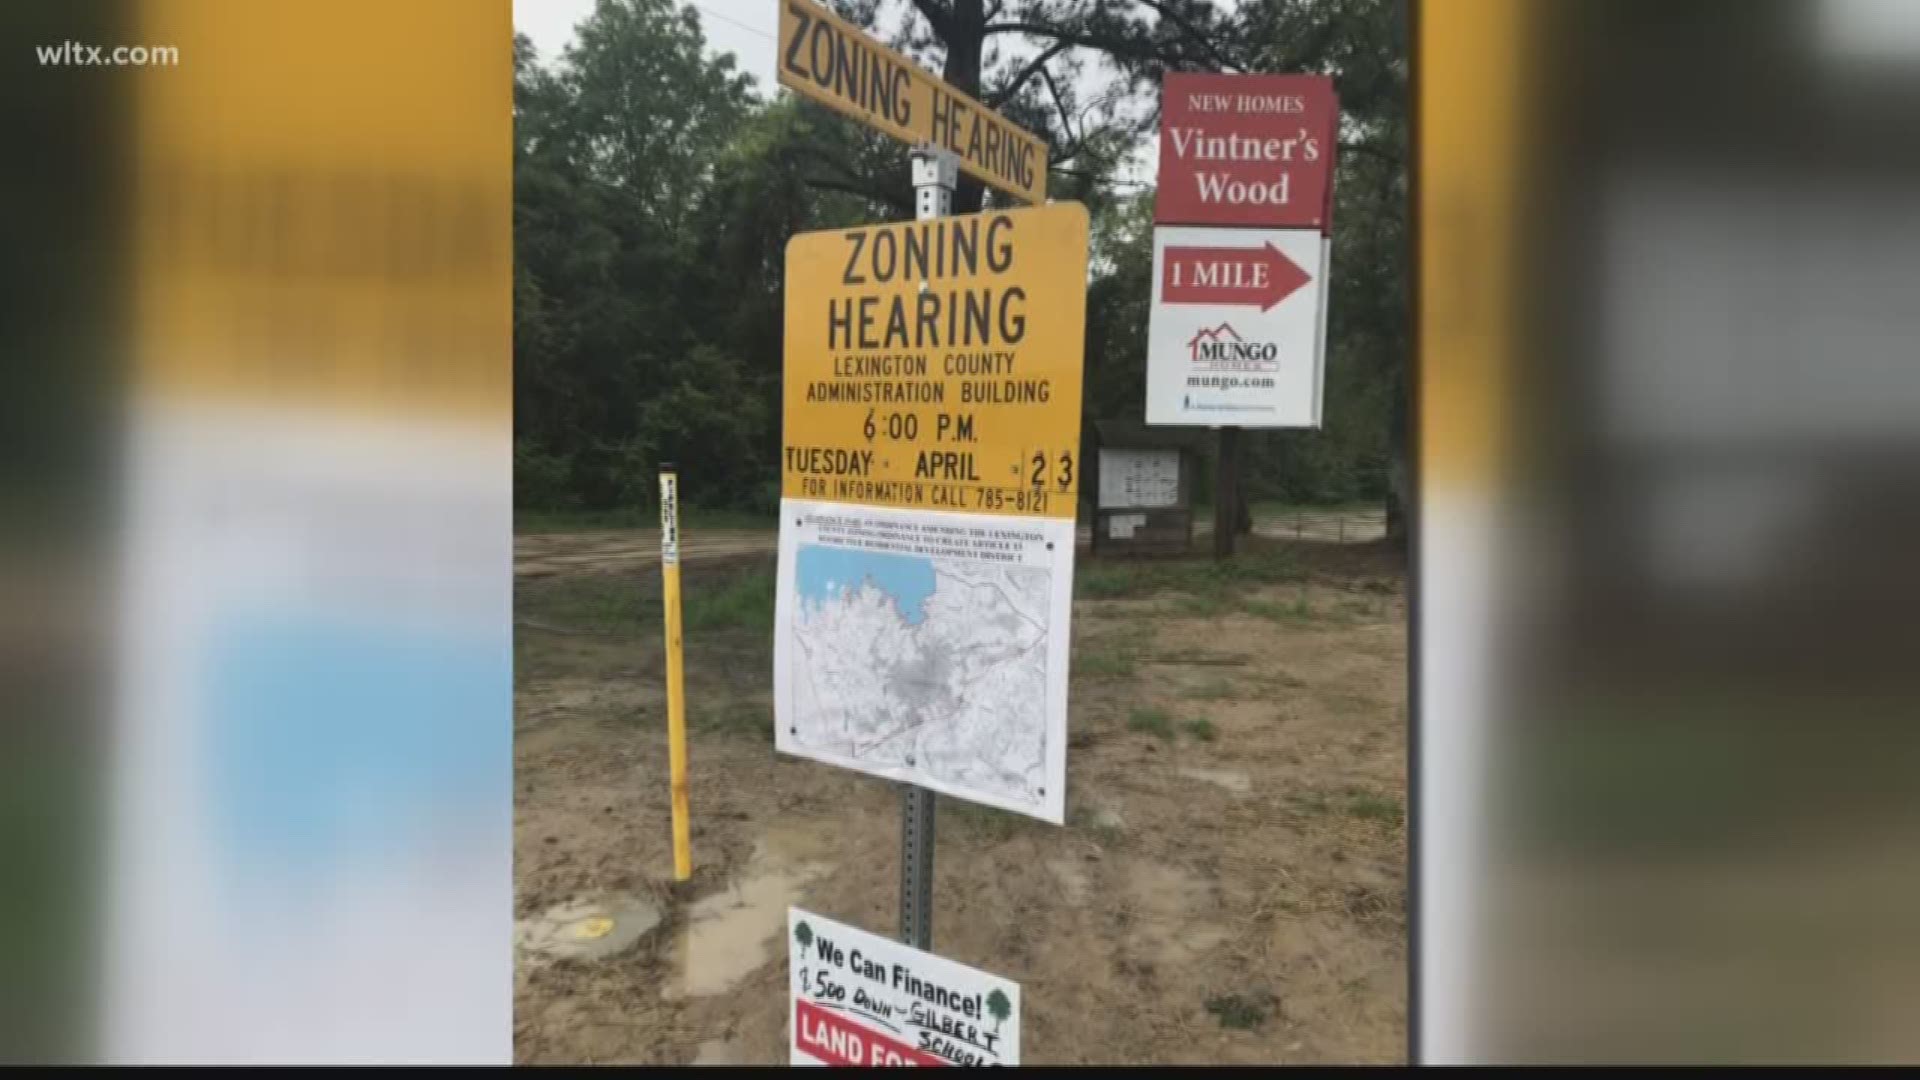 The zoning hearing is set for April 23